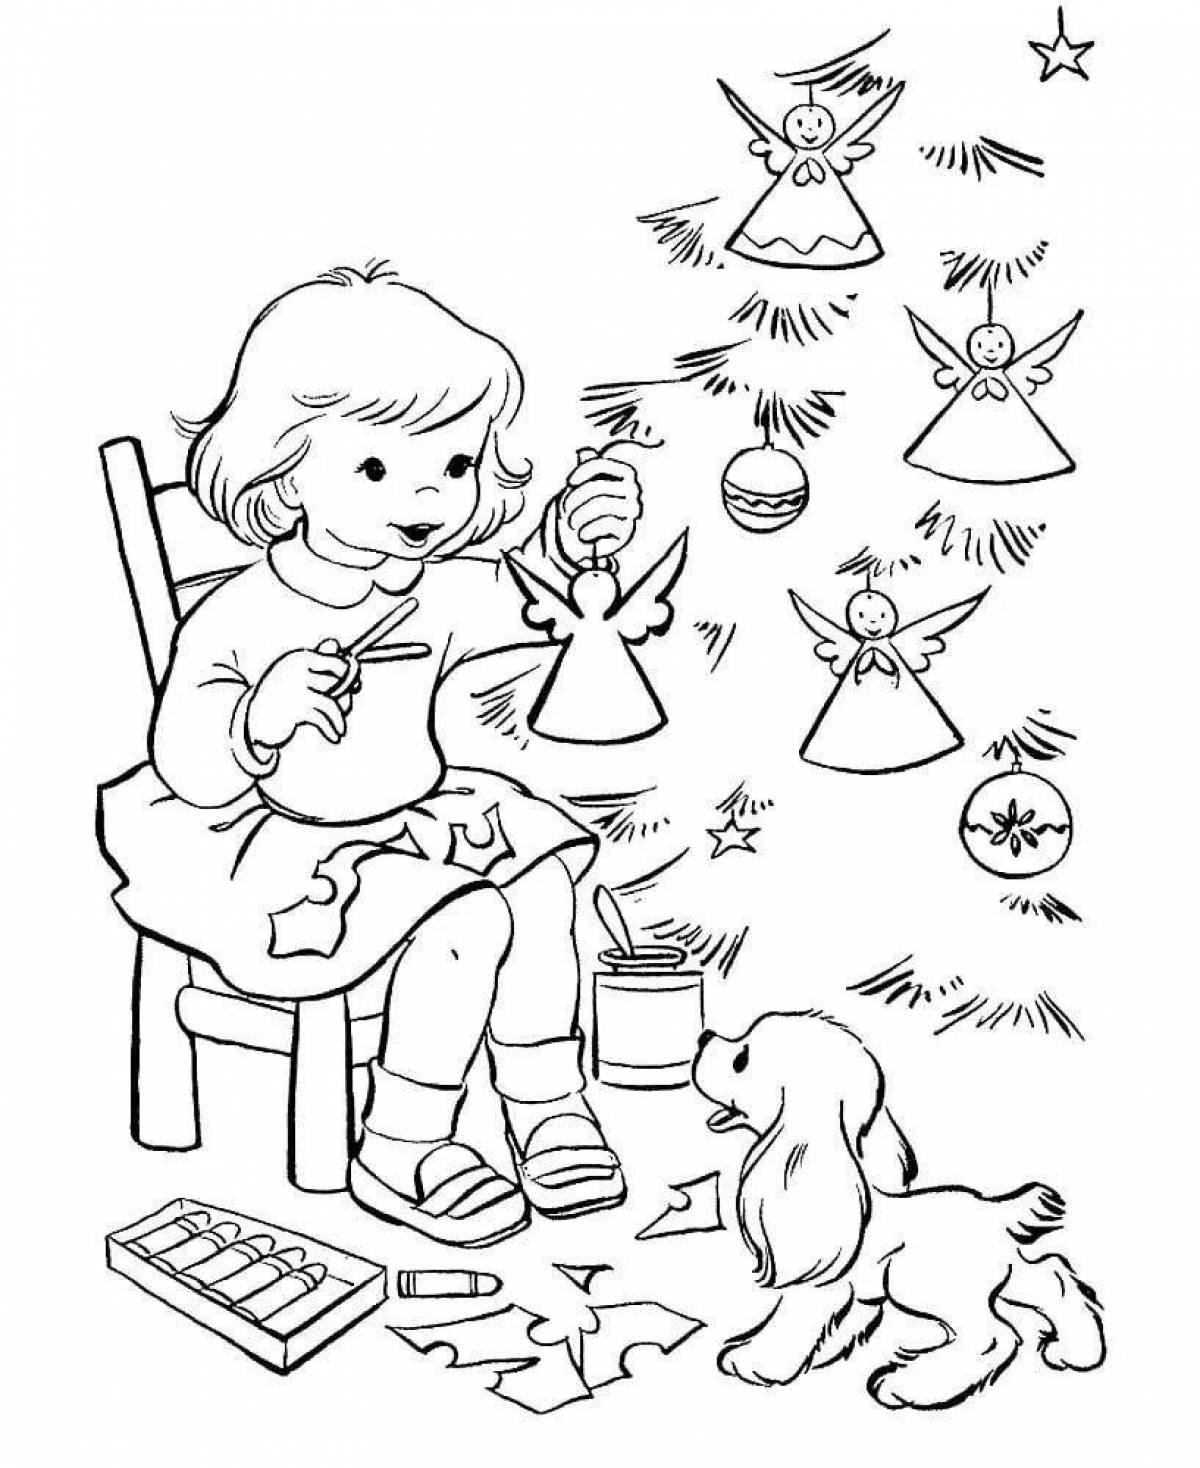 Exalted coloring page baby christmas